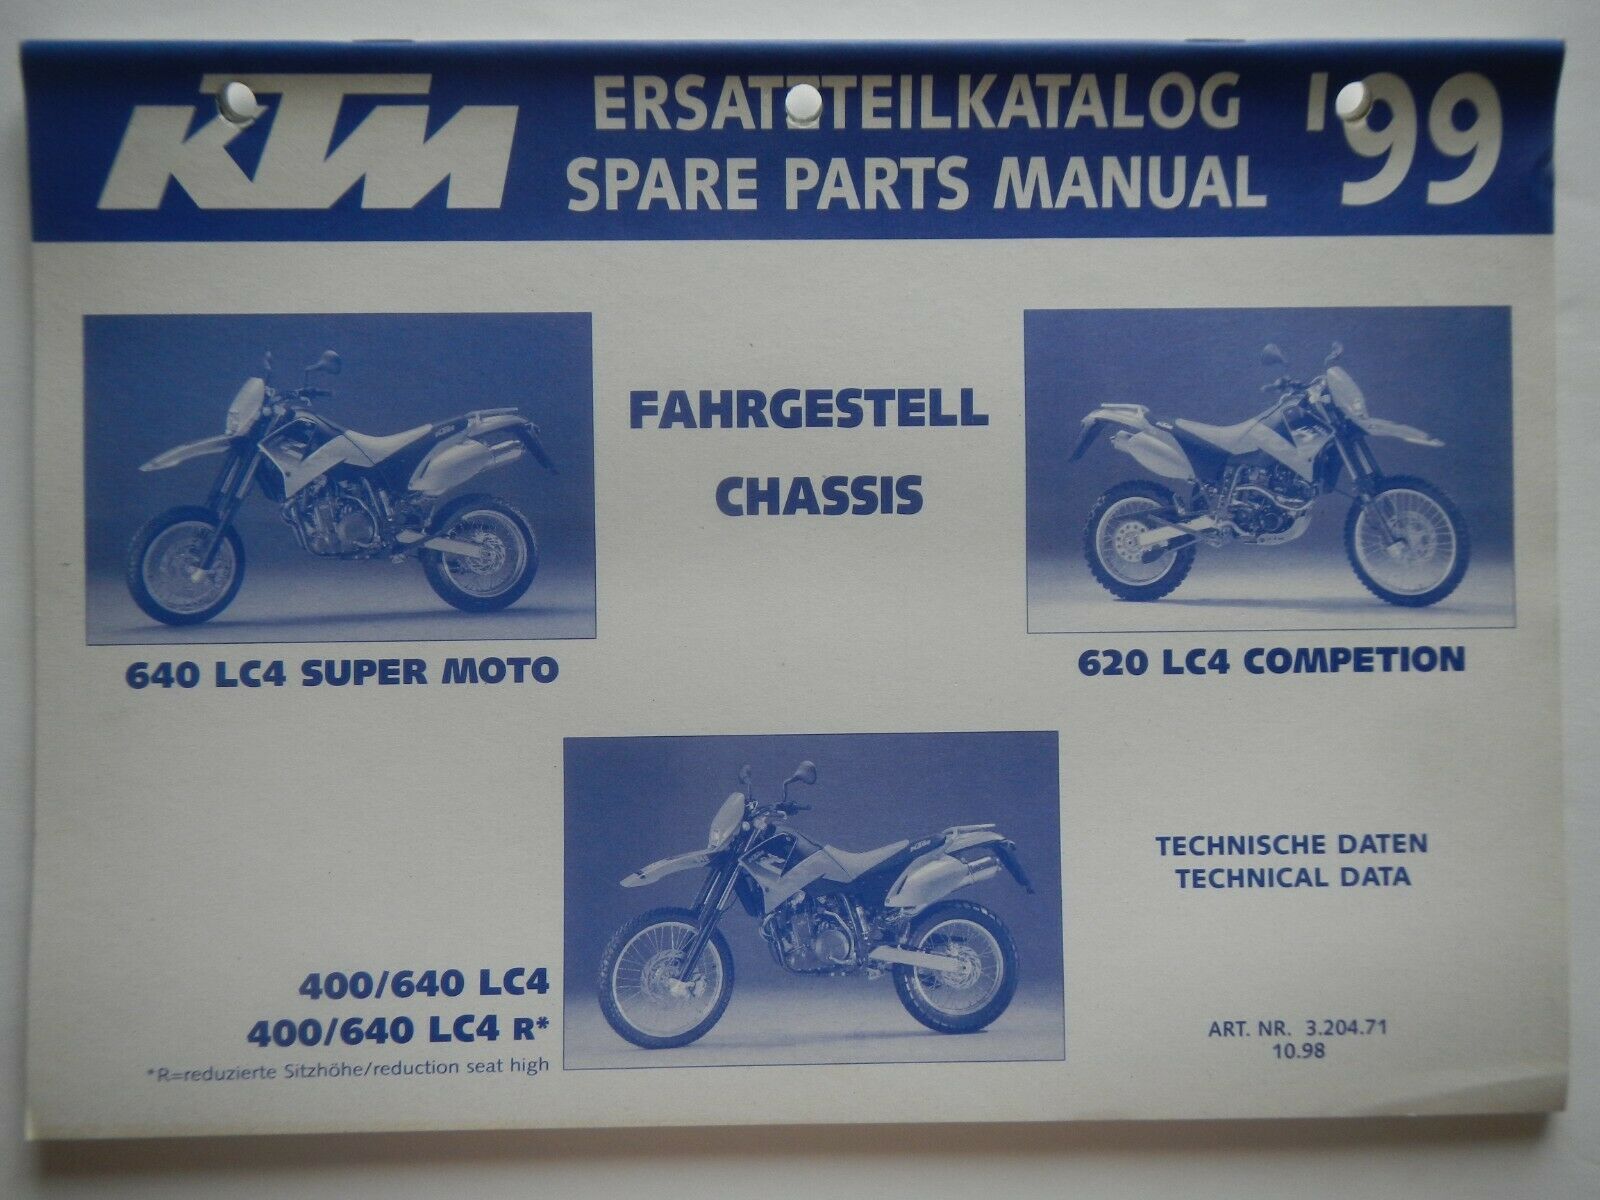 Primary image for 1999 KTM Spare Parts Manual Chassis 640 LC4 Super Moto 400 R 620 Competition